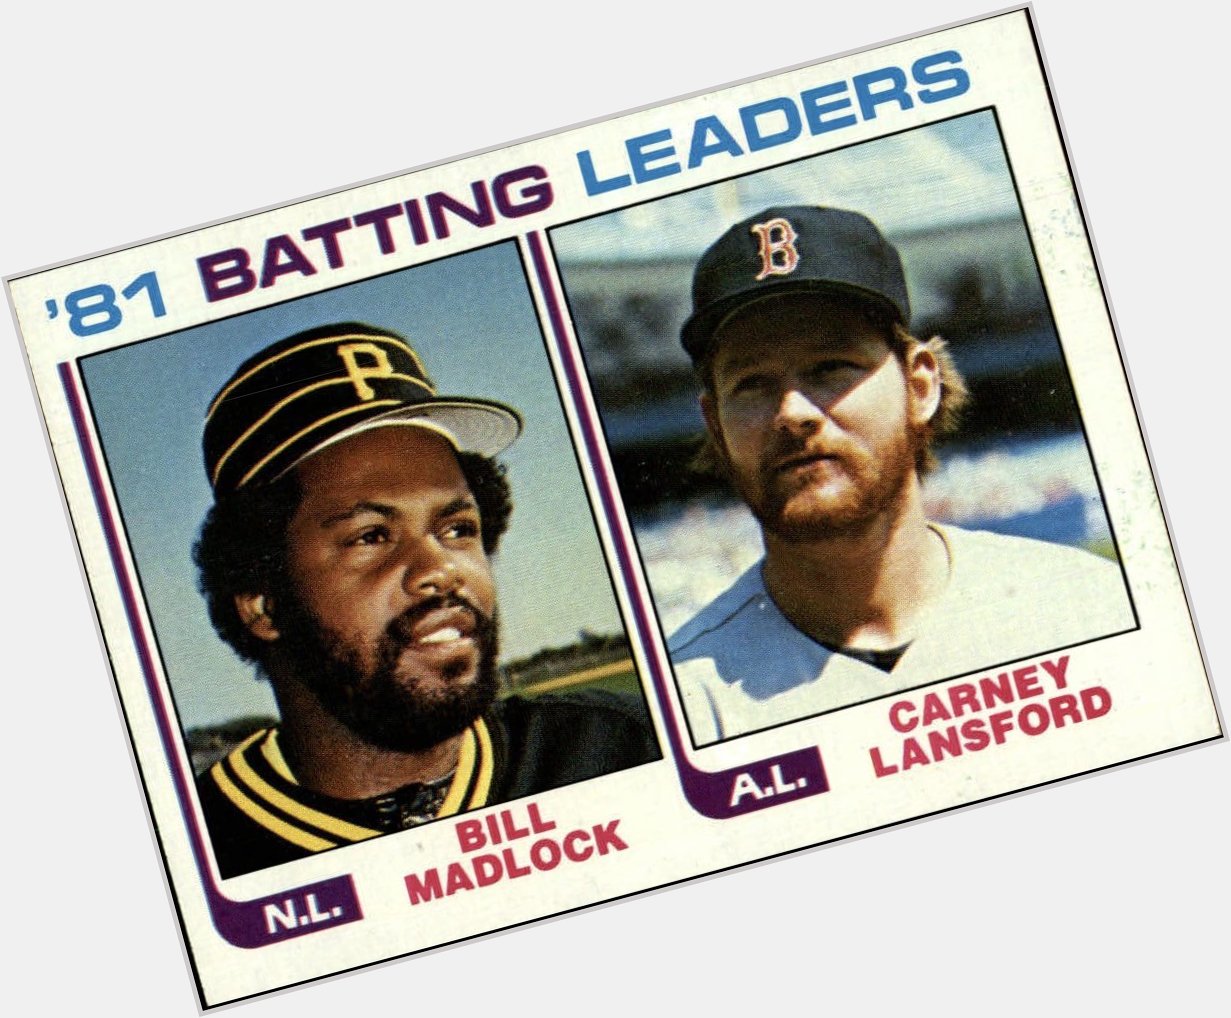 Happy birthday Carney Lansford. Before there was Wade Boggs, there was Carney Lansford. 